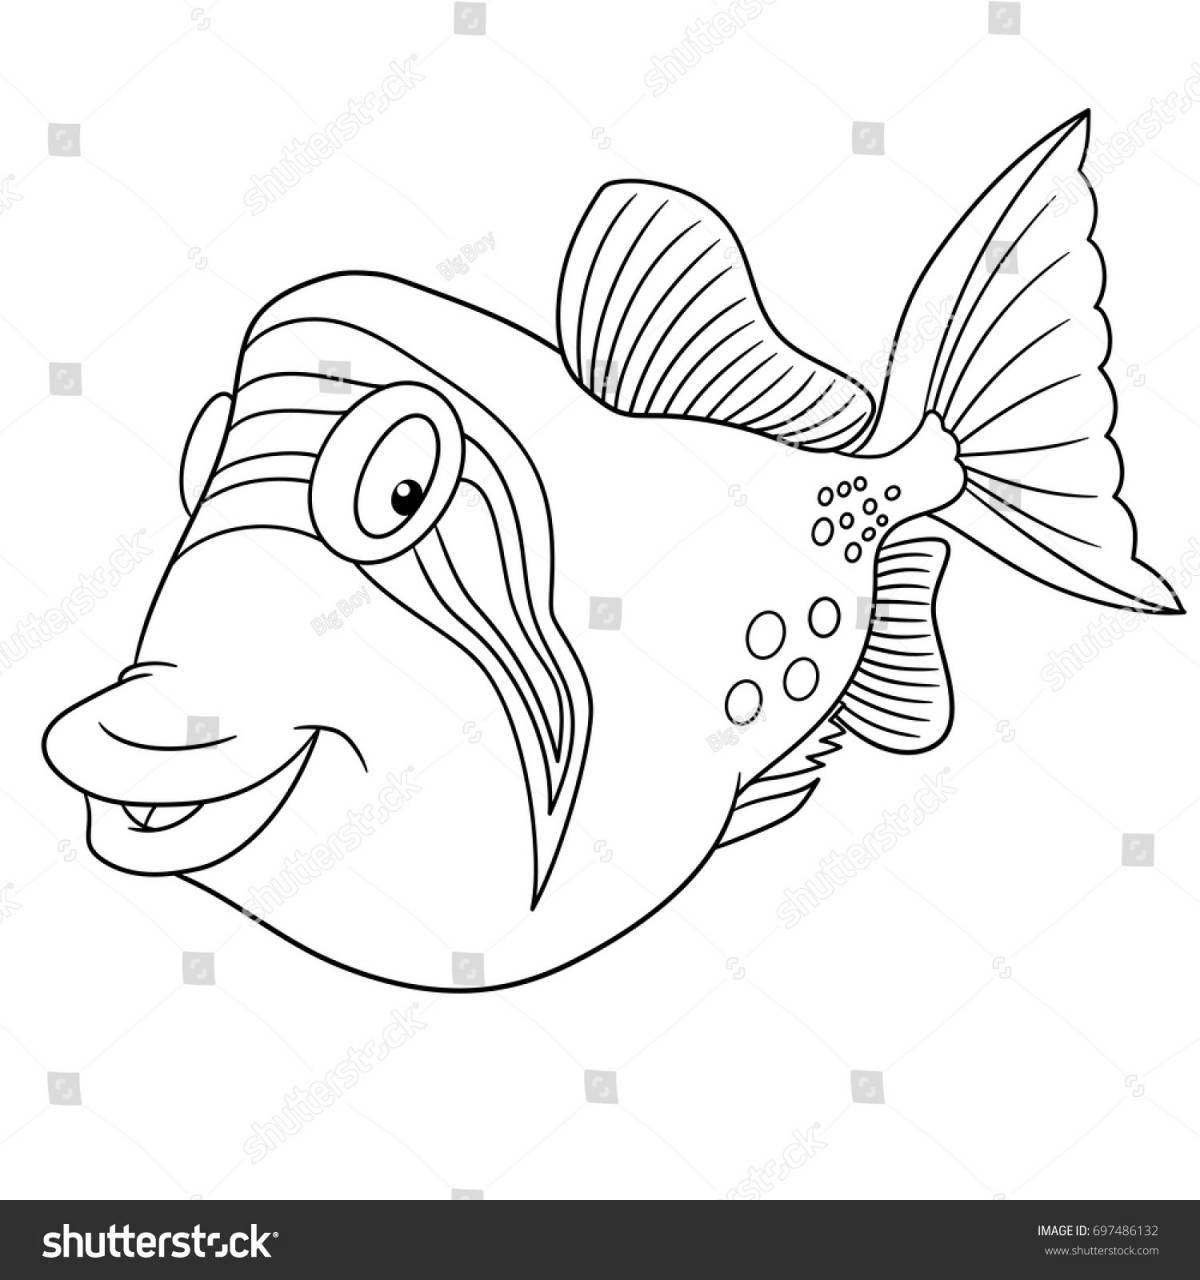 Outstanding parrot fish coloring page